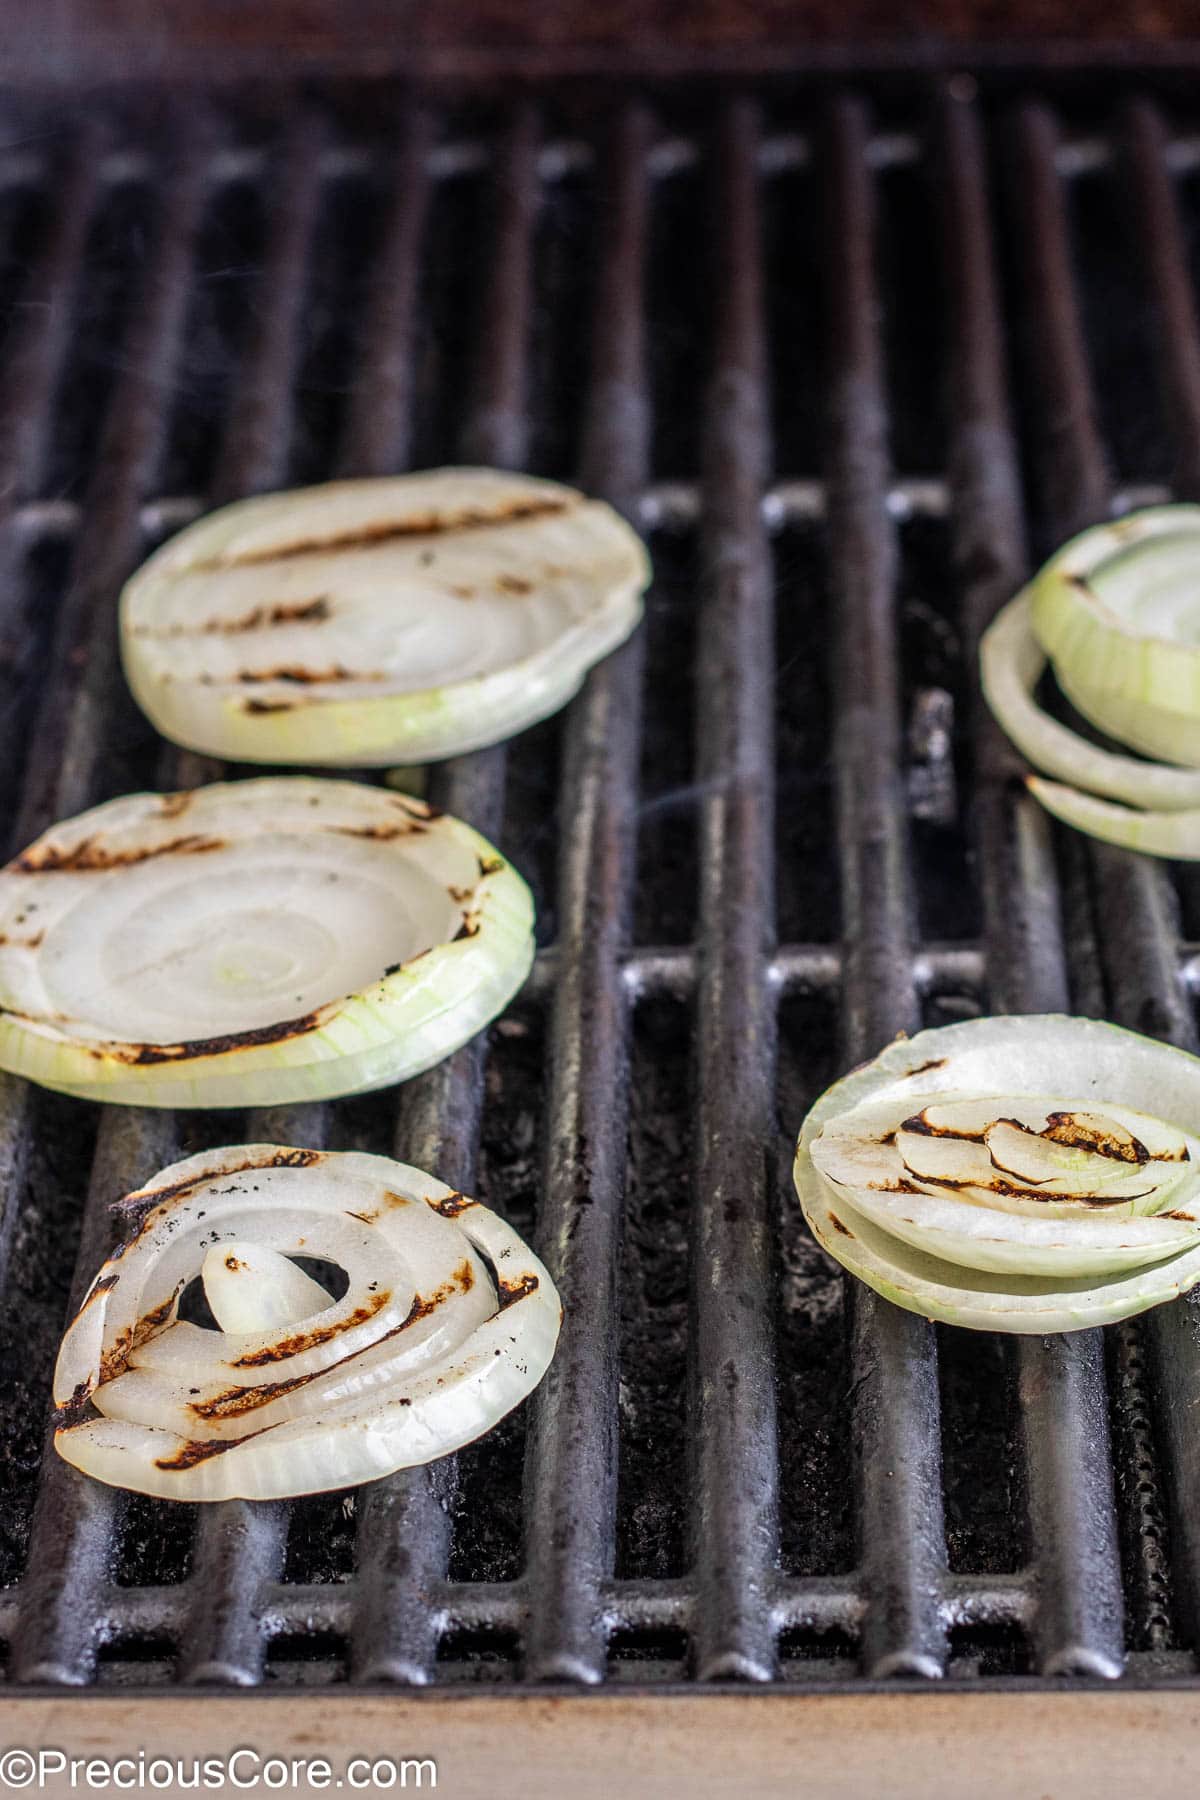 Round slices of onions on a grill.